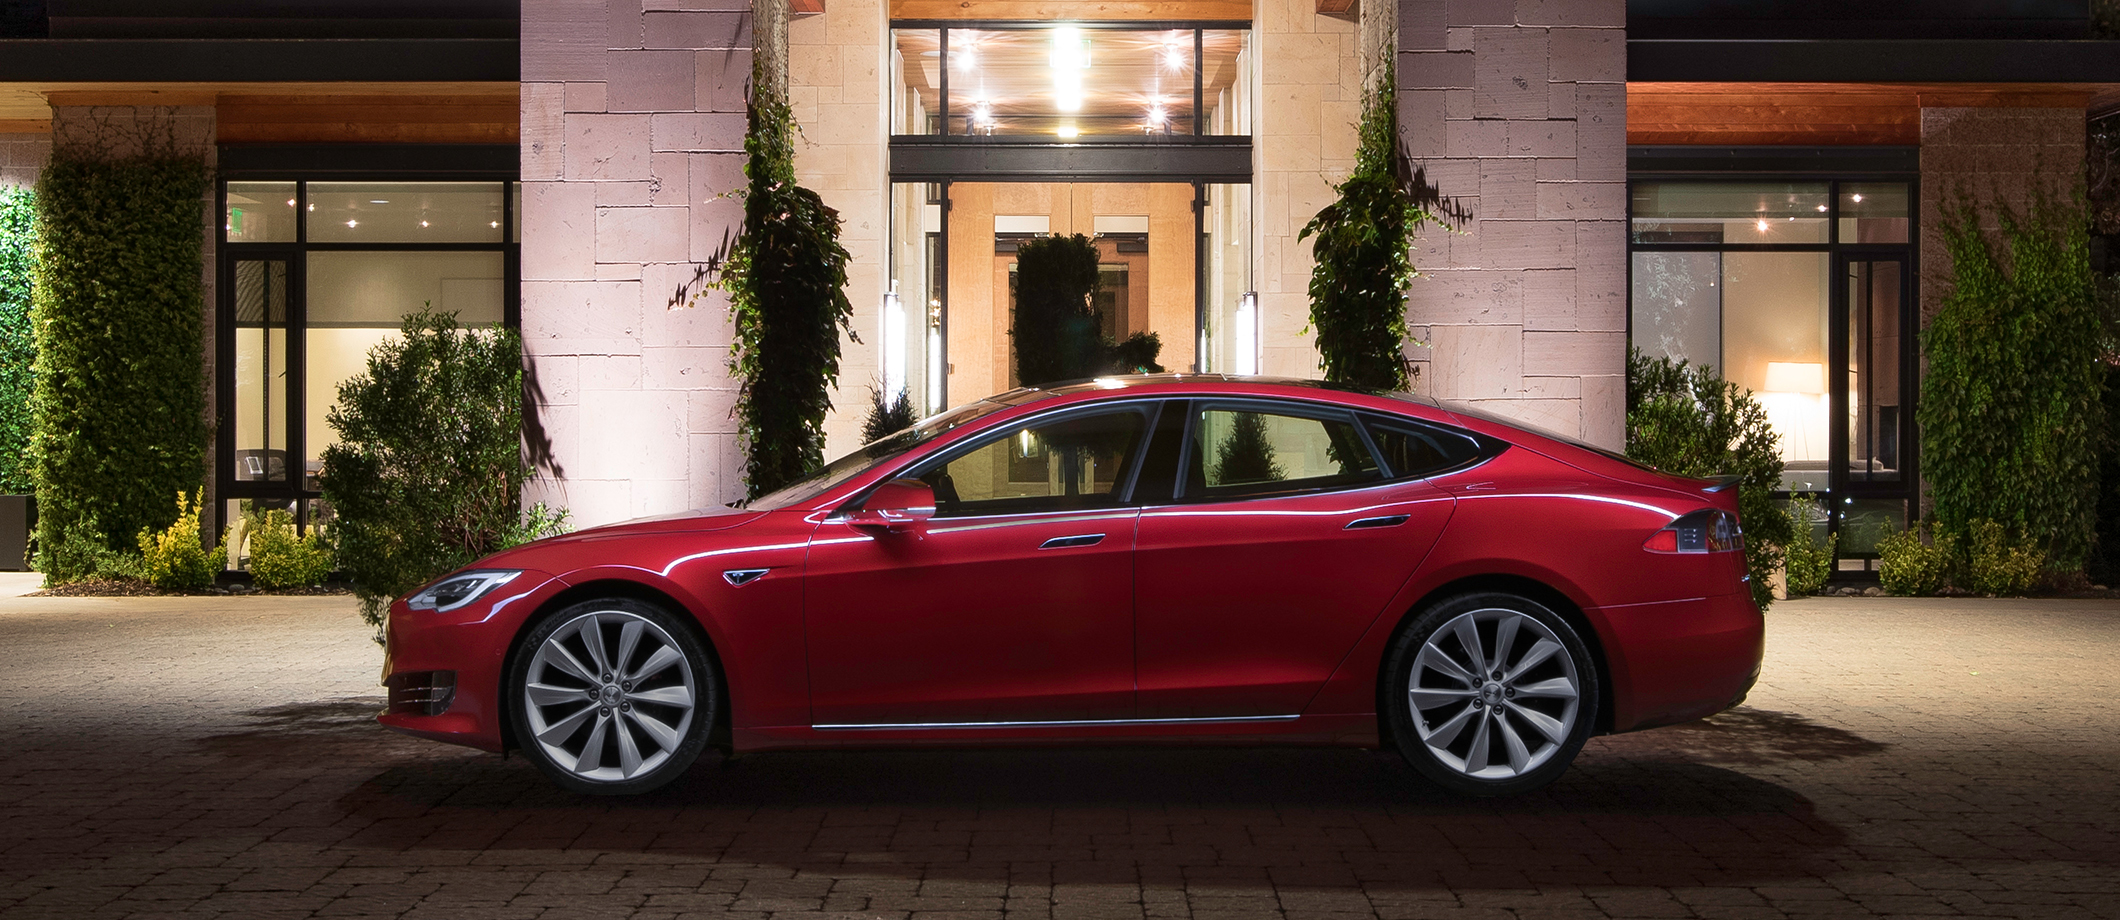 Tesla’s least expensive vehicle is now the Model S 75 at 69,500 after